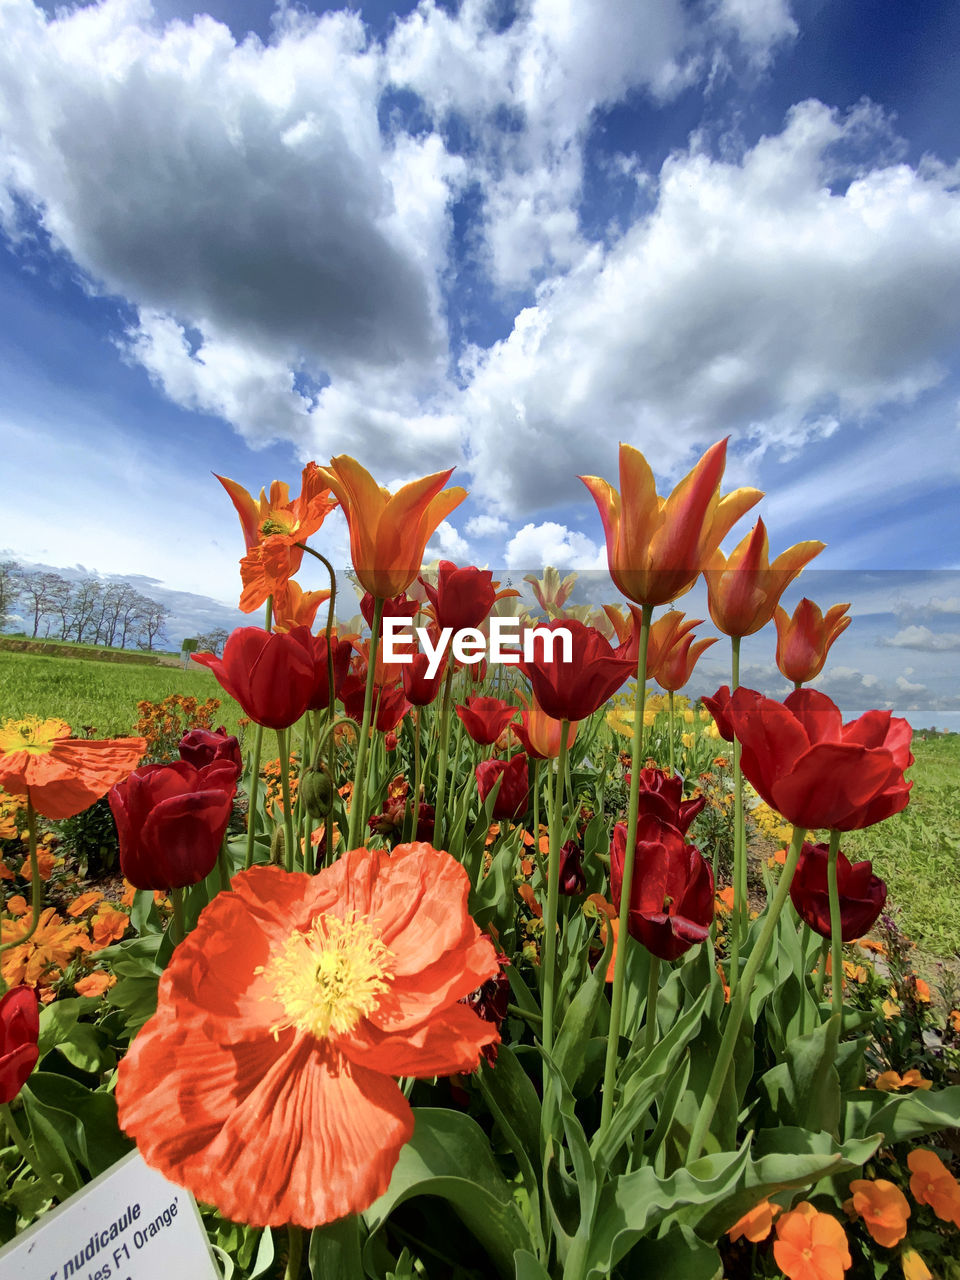 plant, flower, flowering plant, cloud, beauty in nature, sky, nature, freshness, landscape, flower head, red, growth, land, environment, petal, inflorescence, fragility, no people, field, multi colored, outdoors, scenics - nature, rural scene, plant part, leaf, springtime, poppy, close-up, wildflower, day, summer, vibrant color, blossom, sunlight, blue, meadow, cloudscape, flowerbed, agriculture